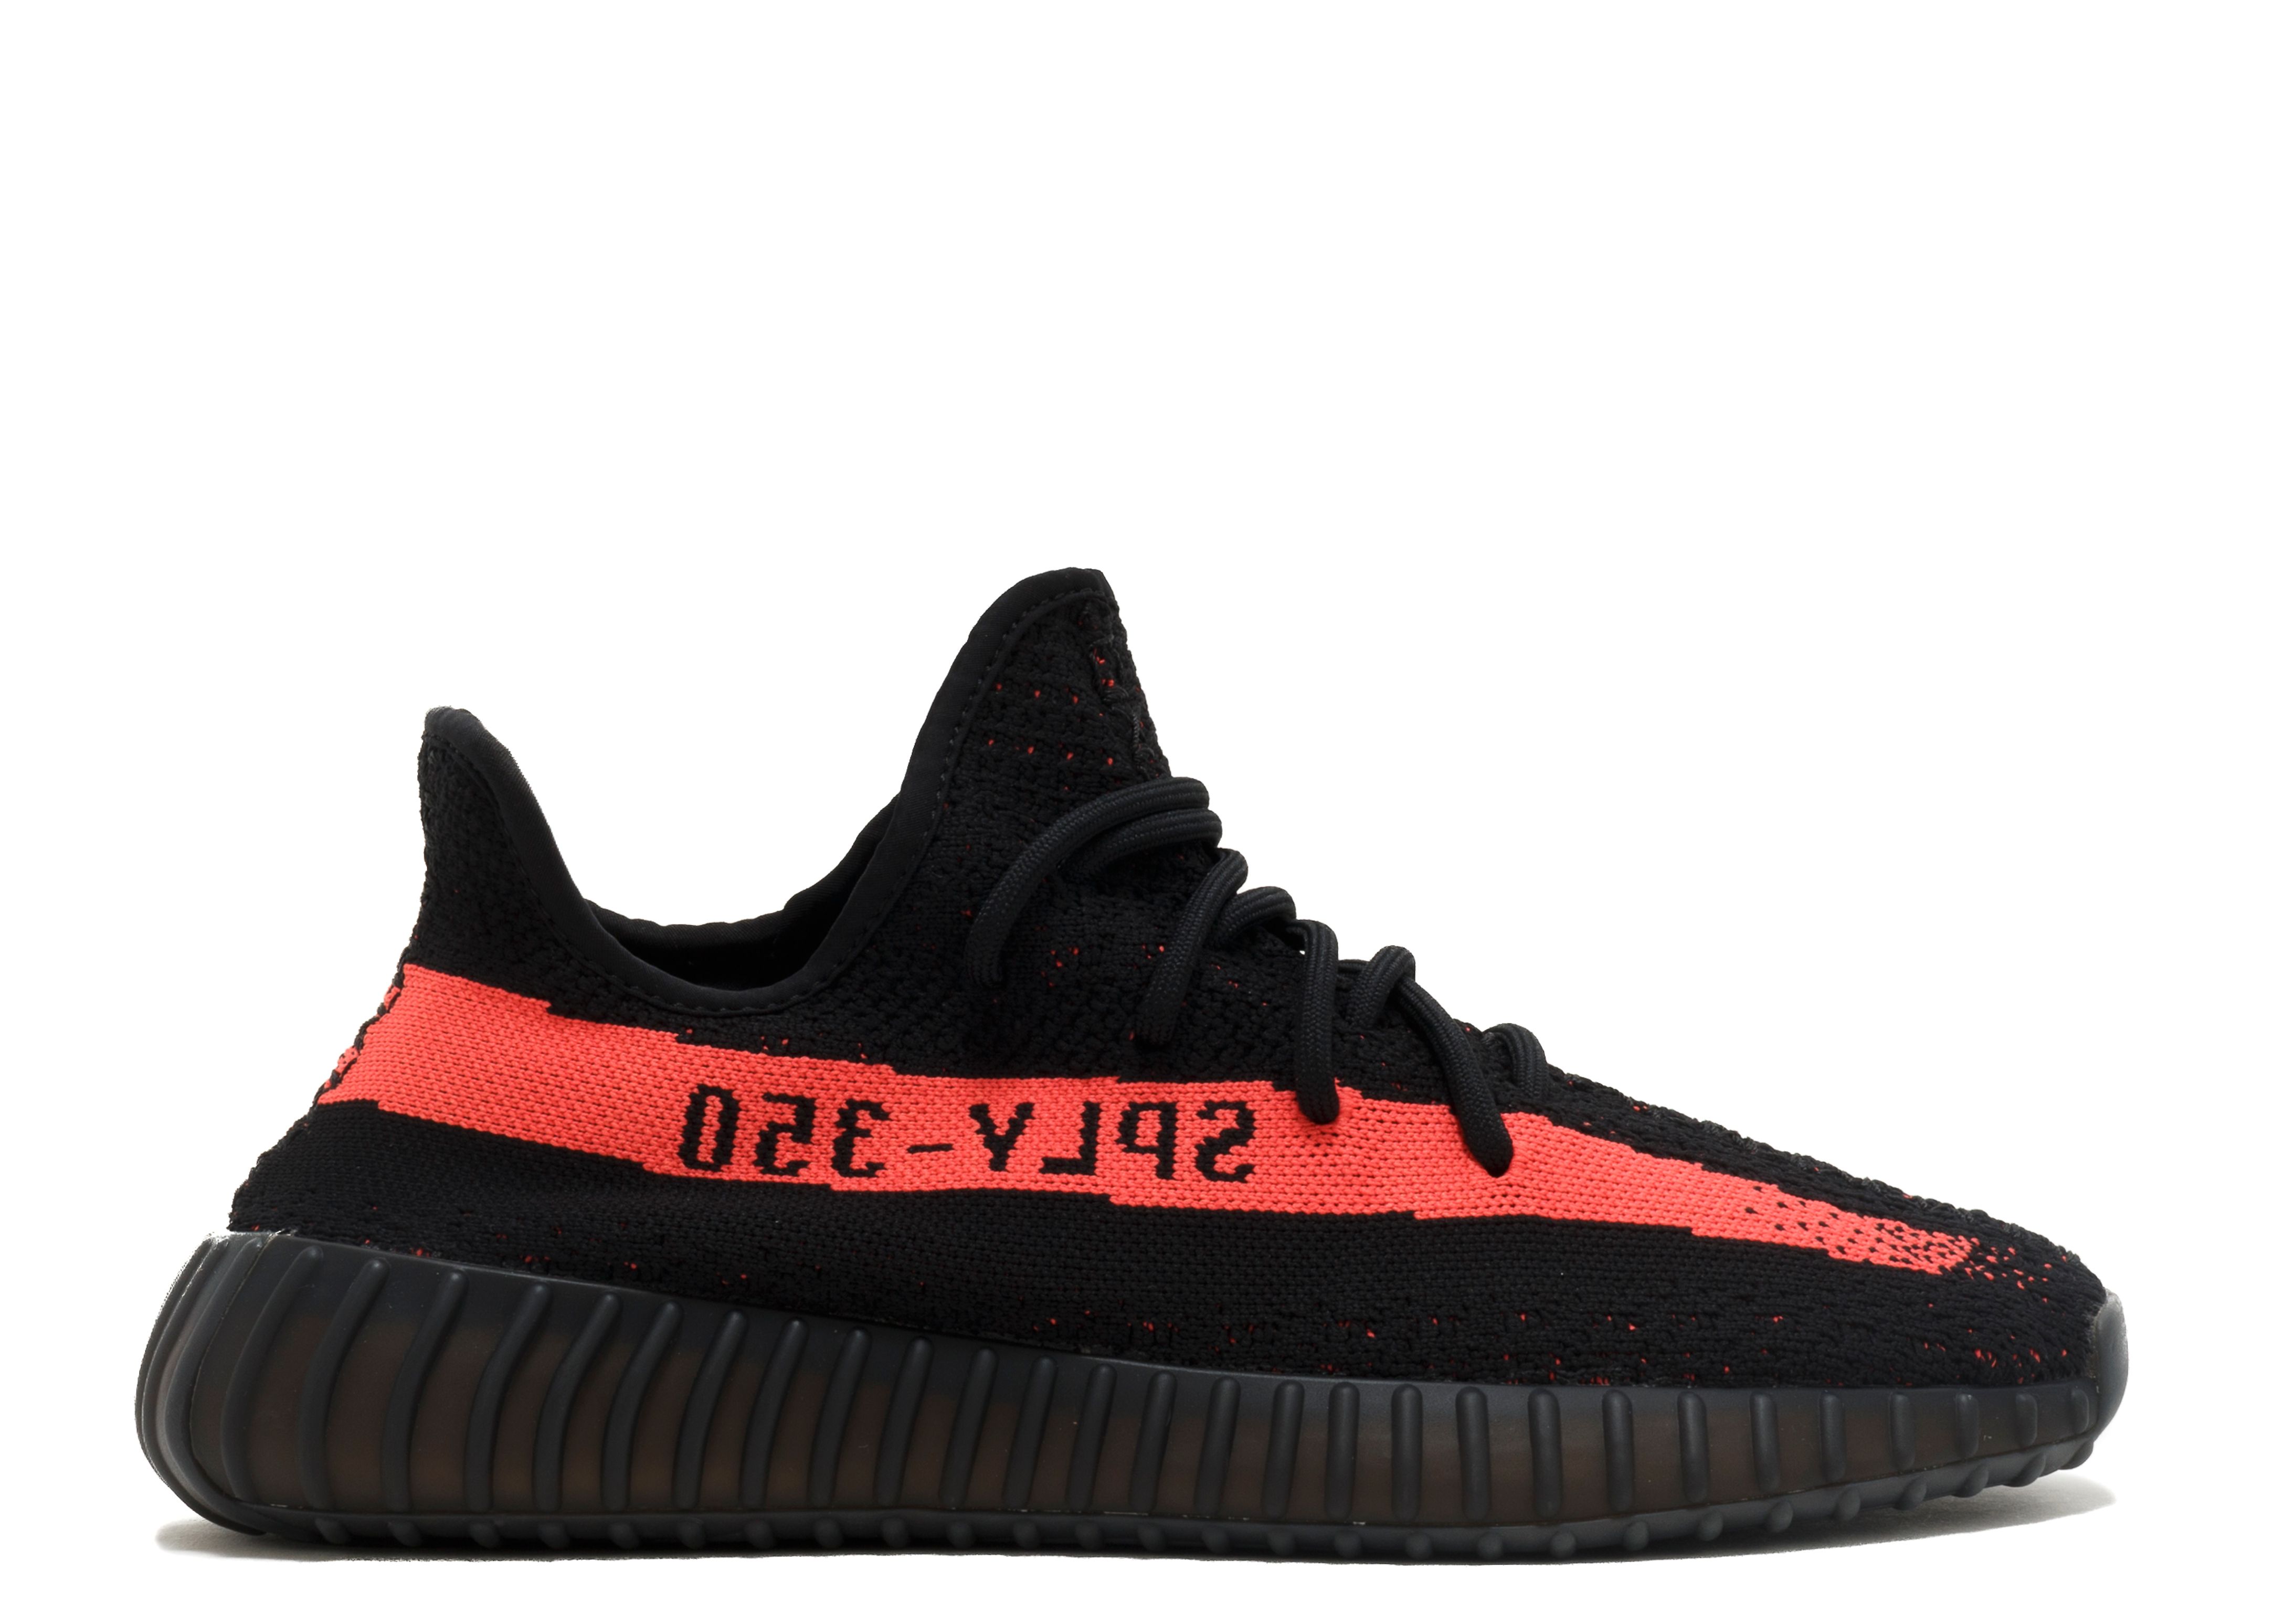 YEEZY BOOST 350 V2 Black Red BRED UNBOXING \\\\\\\\ u0026 REVIEW